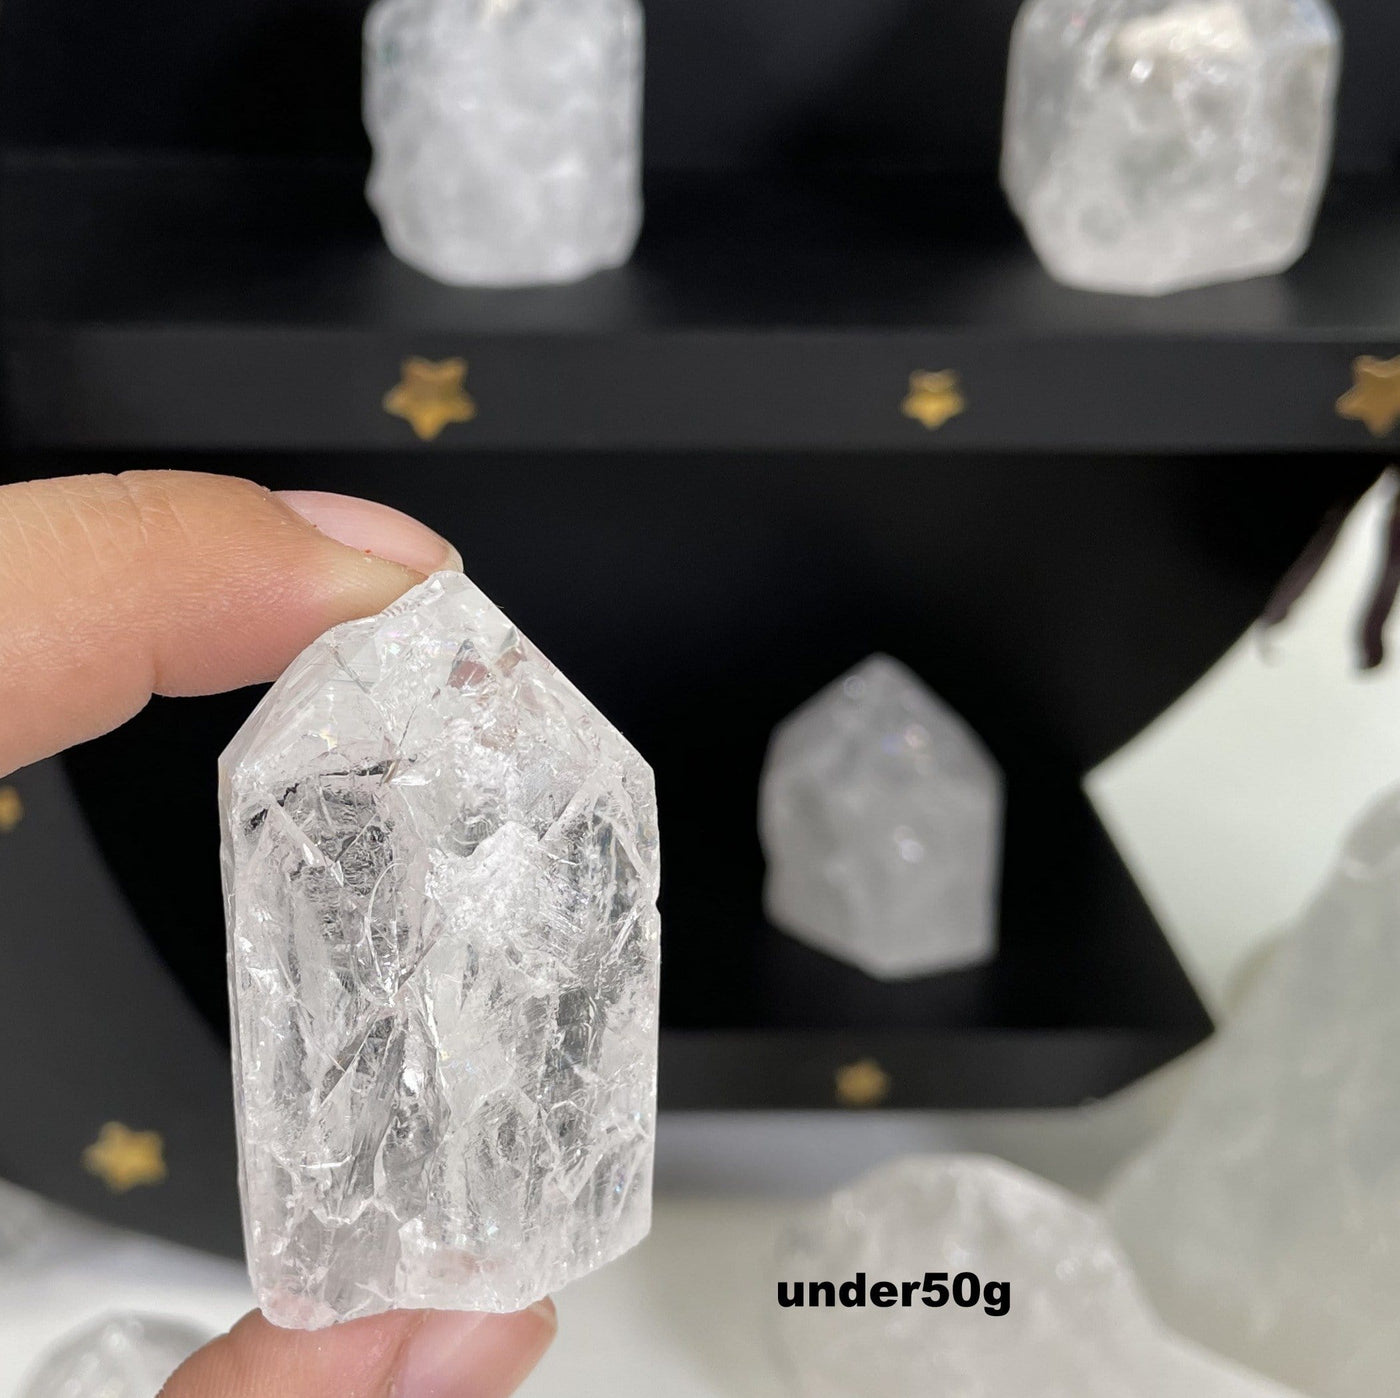 Crackle Quartz Semi-Polished Point in the under 50g size